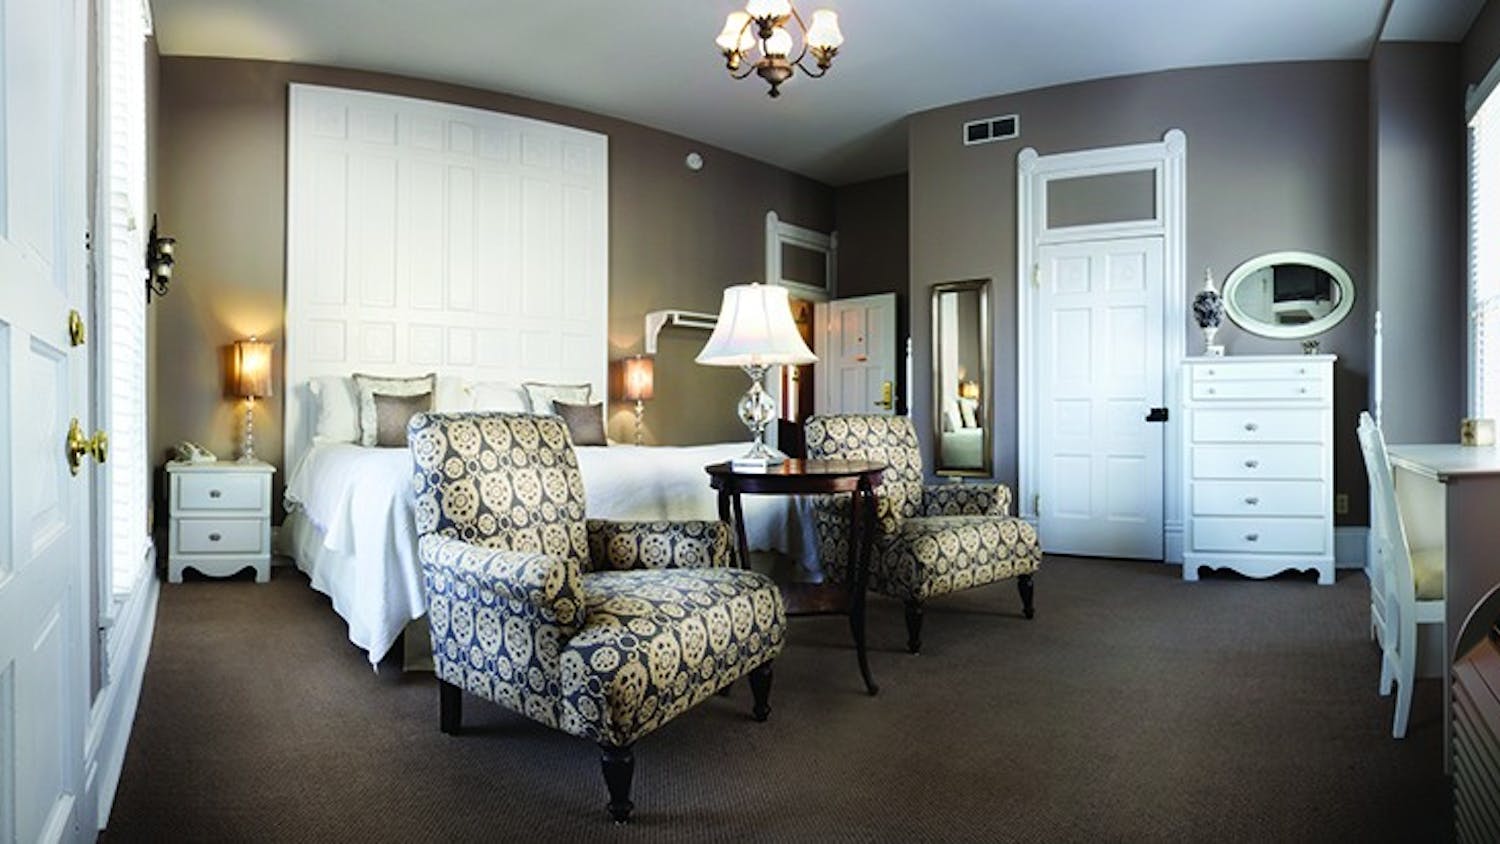 Each room at Grant Street Inn offers unique and elegant furnishings.